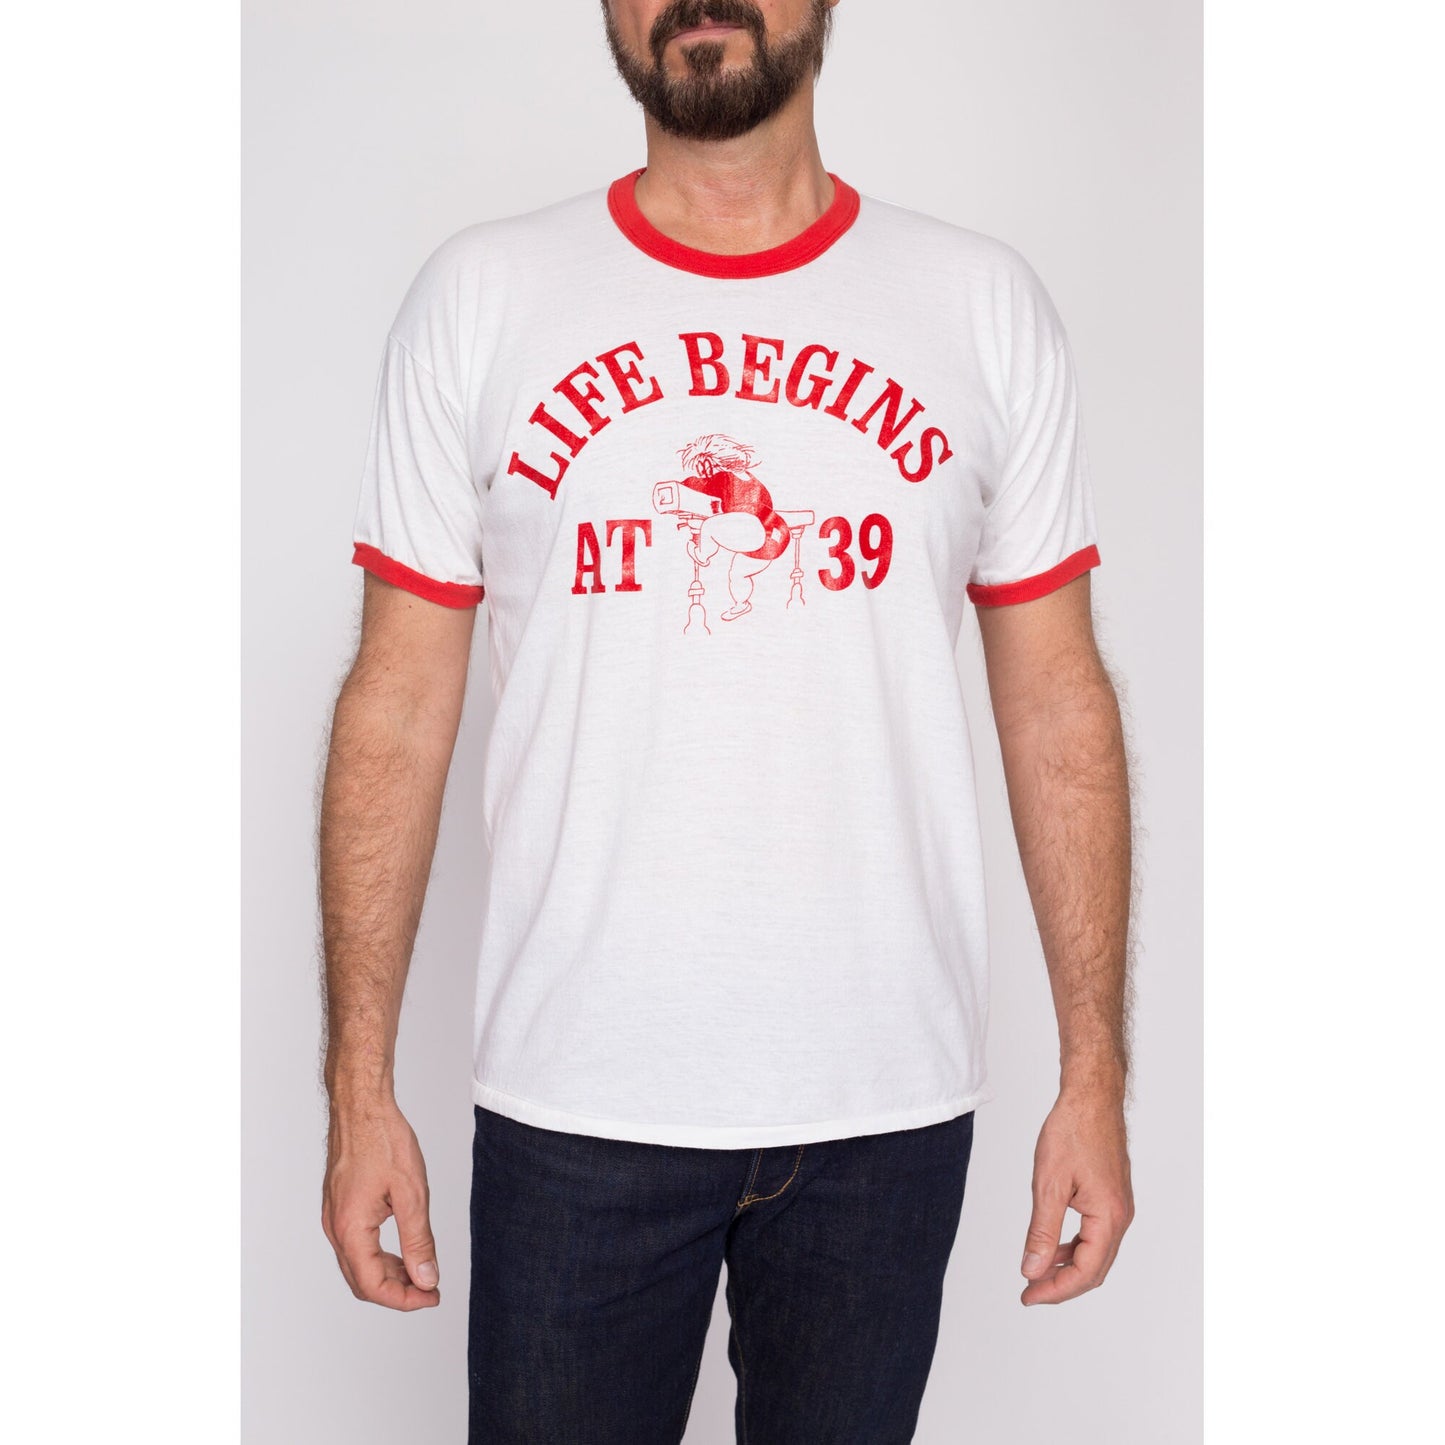 L| 80s "Life Begins At 39" Funny Birthday T Shirt - Men's Large | Vintage White Red Gymnast Graphic Ringer Tee